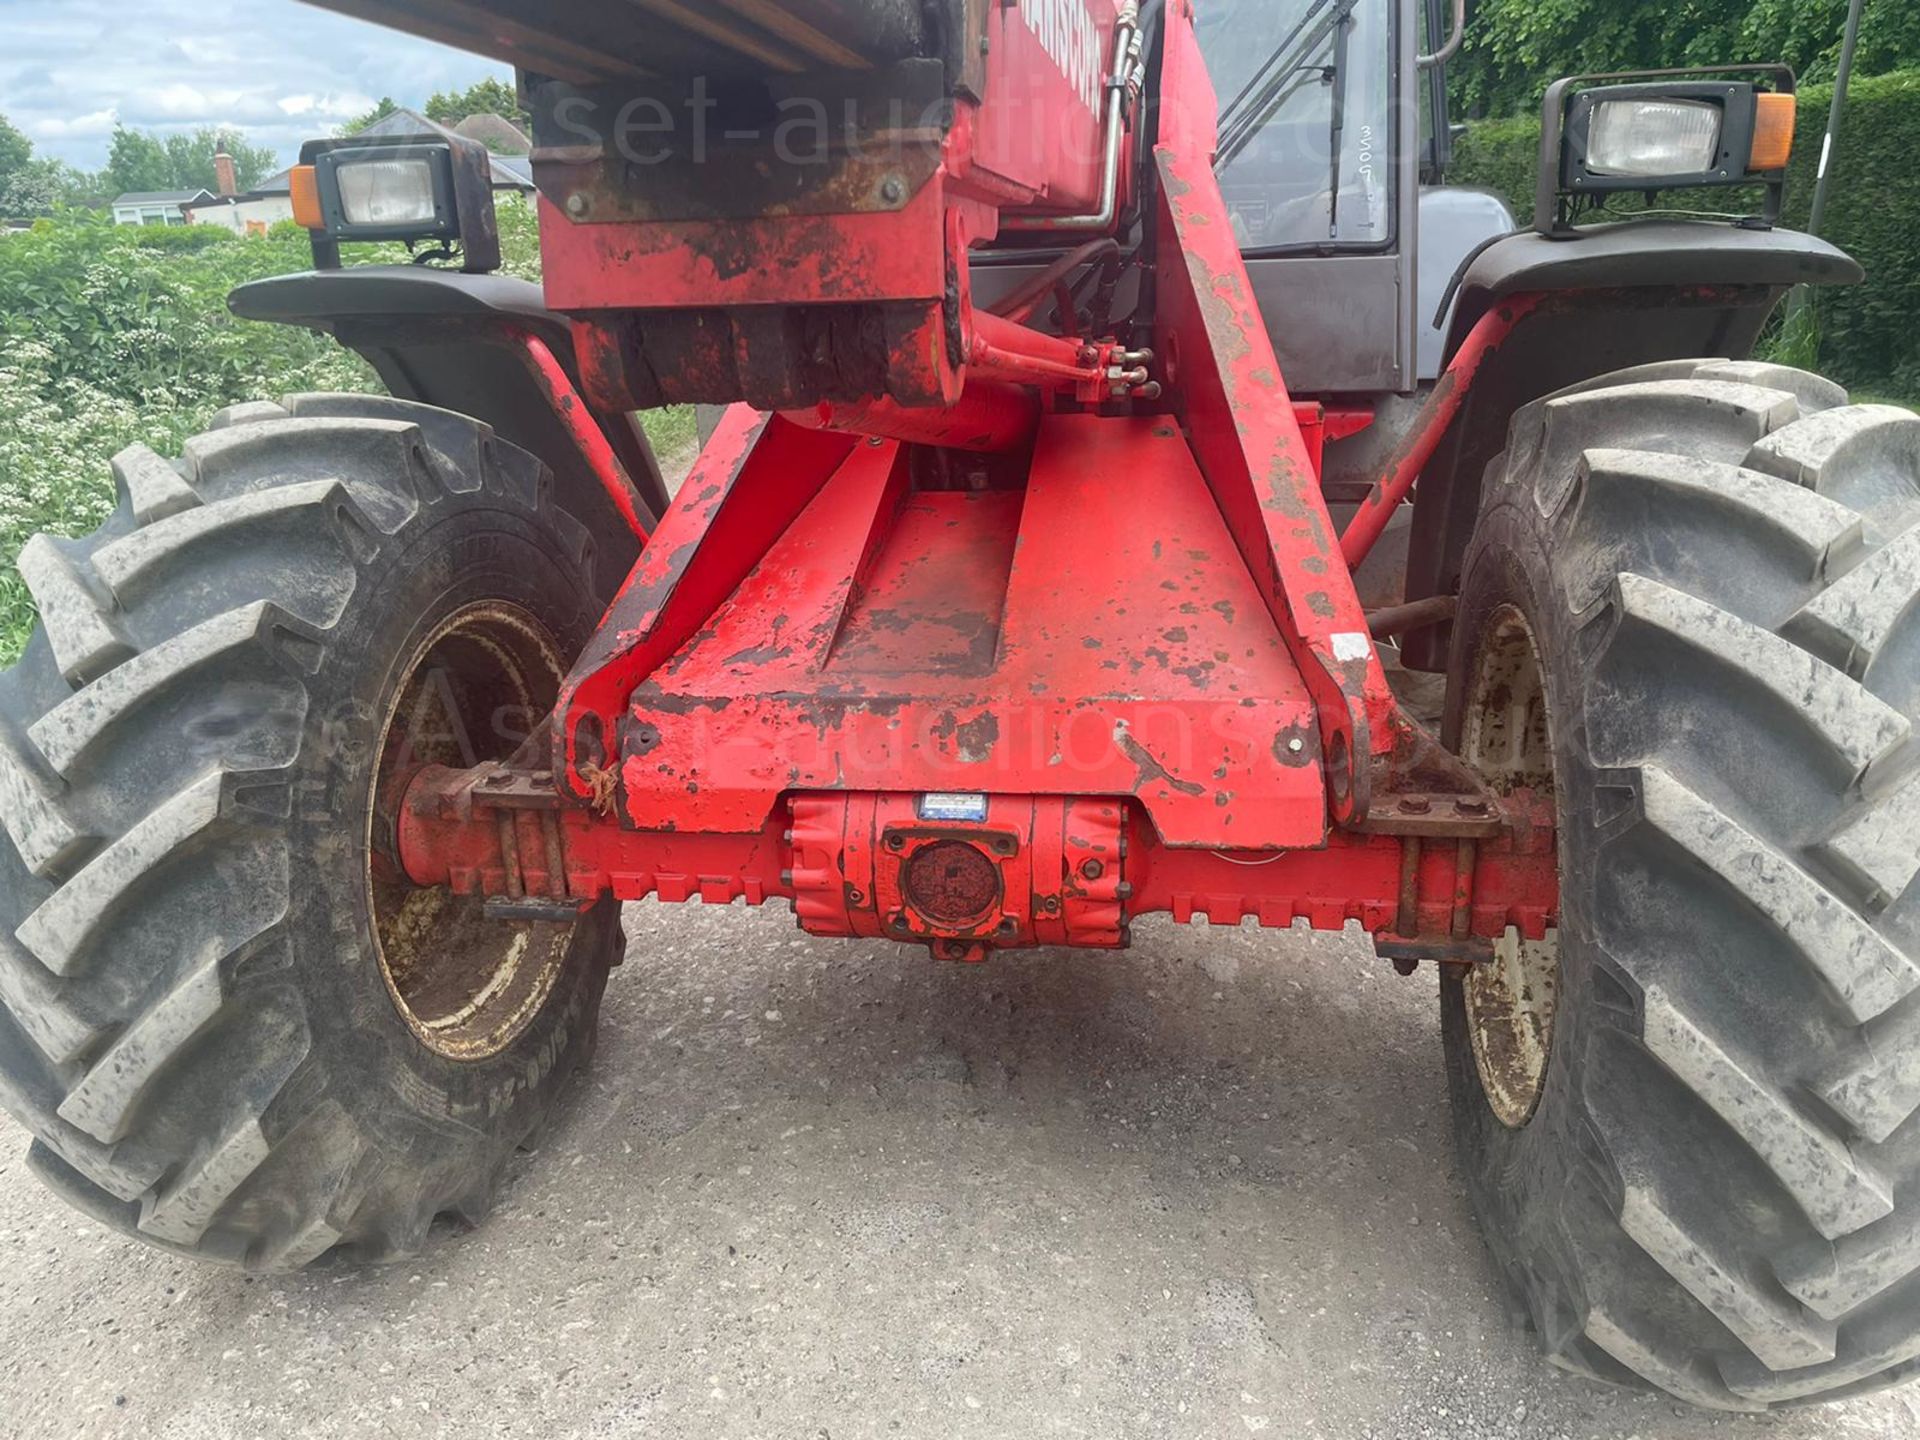 2000 MANITOU MLA 628 ARTICULATED TELESCOPIC TELEHANDLER, RUNS DRIVES AND LIFTS *PLUS VAT* - Image 18 of 26